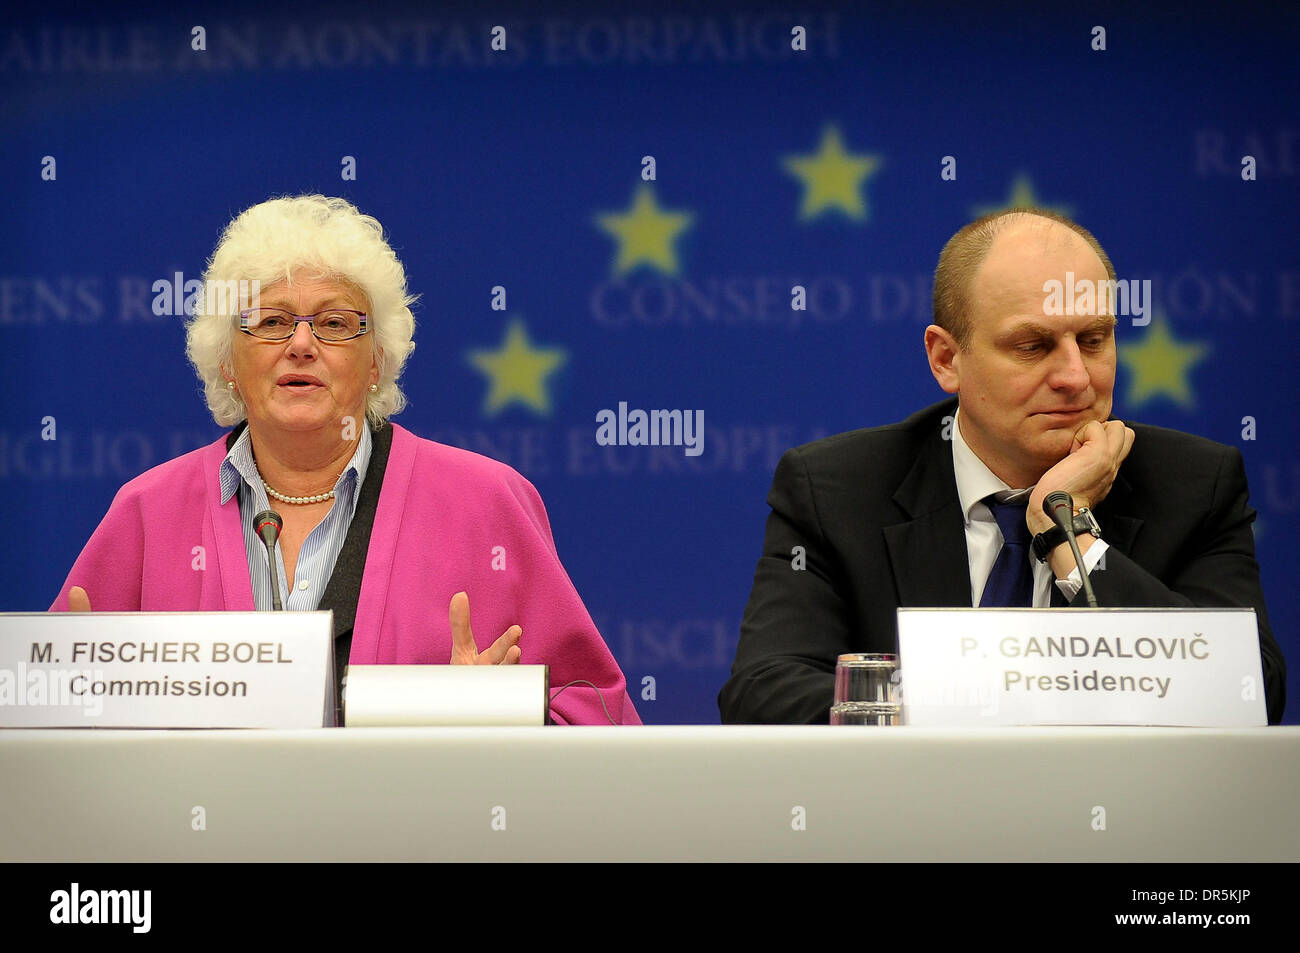 Mar 23, 2009 - Brussels, Belgium - European Commissioner for Agriculture and Rural Development MARIANN FISCHER BOEL (L) and Czech Chairman of the European agriculture ministers council PETR GANDALOVIC hold a press conference at the end of the European agriculture and fisheries ministers council in  Brussels, Belgium. (Credit Image: © Wiktor Dabkowski/ZUMA Press) Stock Photo